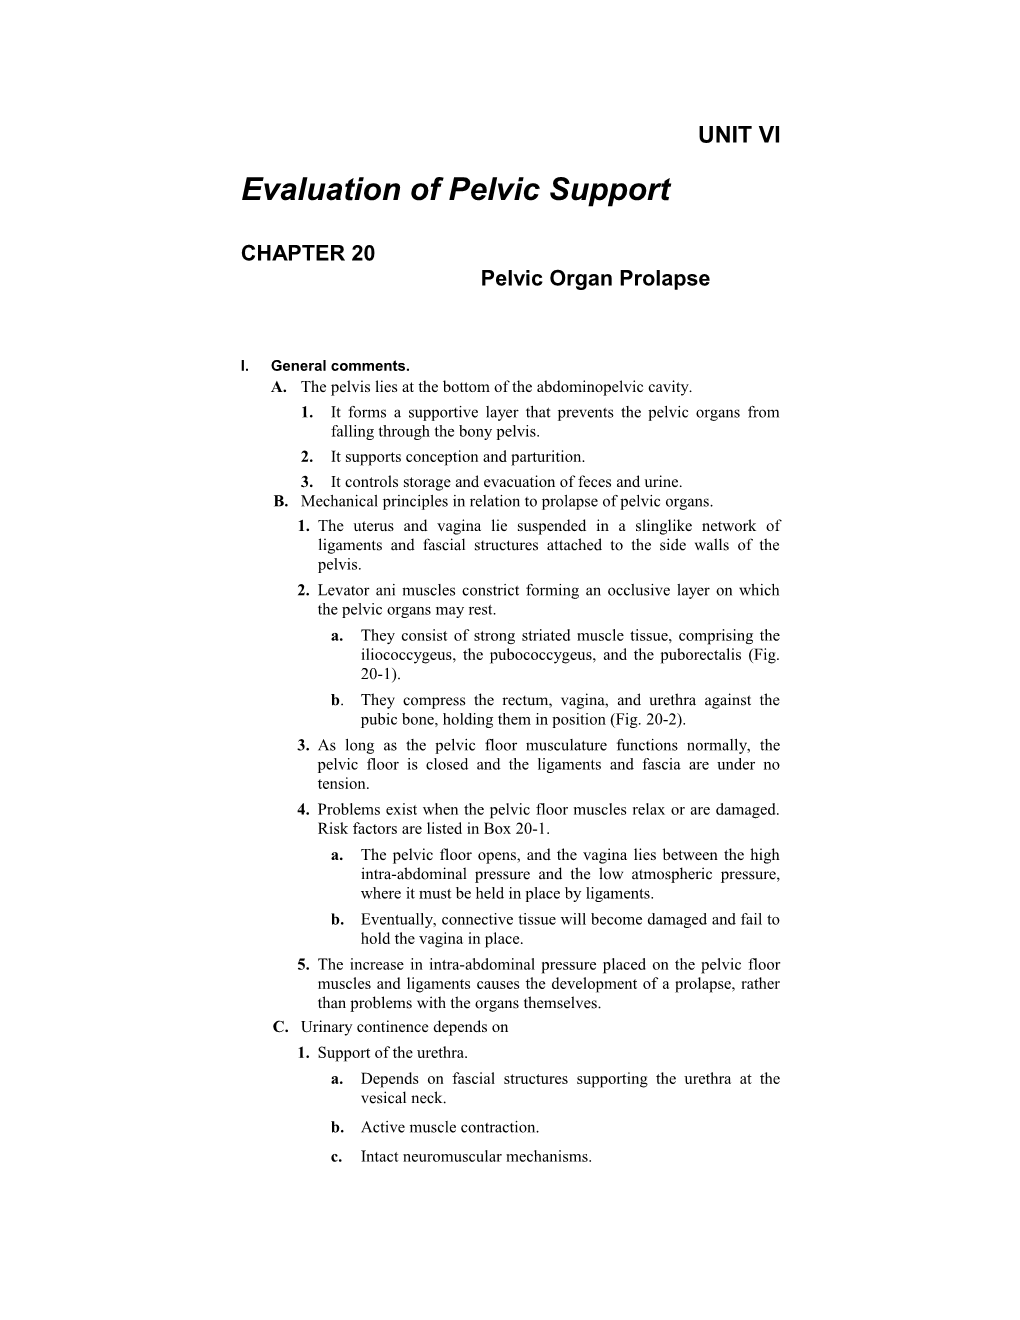 Evaluation of Pelvic Support